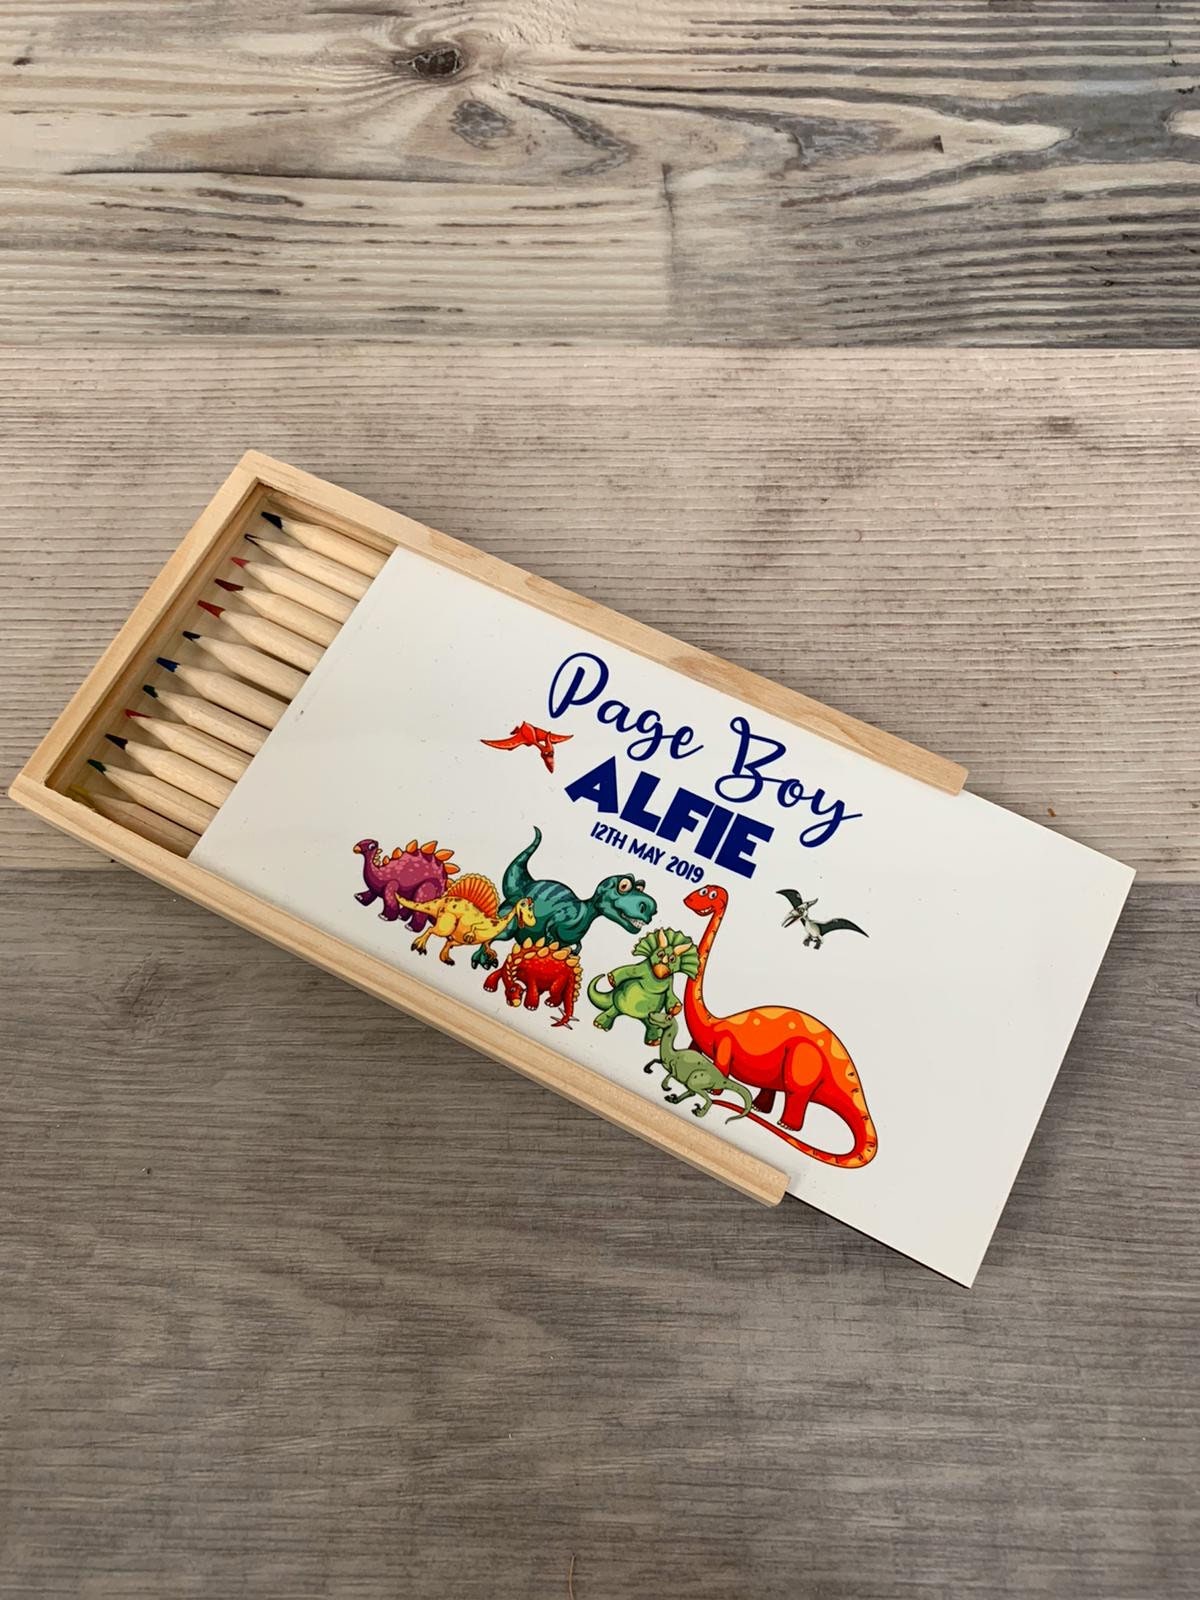 Crayon and Pencil Gift Boxes for Teacher Gifts Story - Abbi